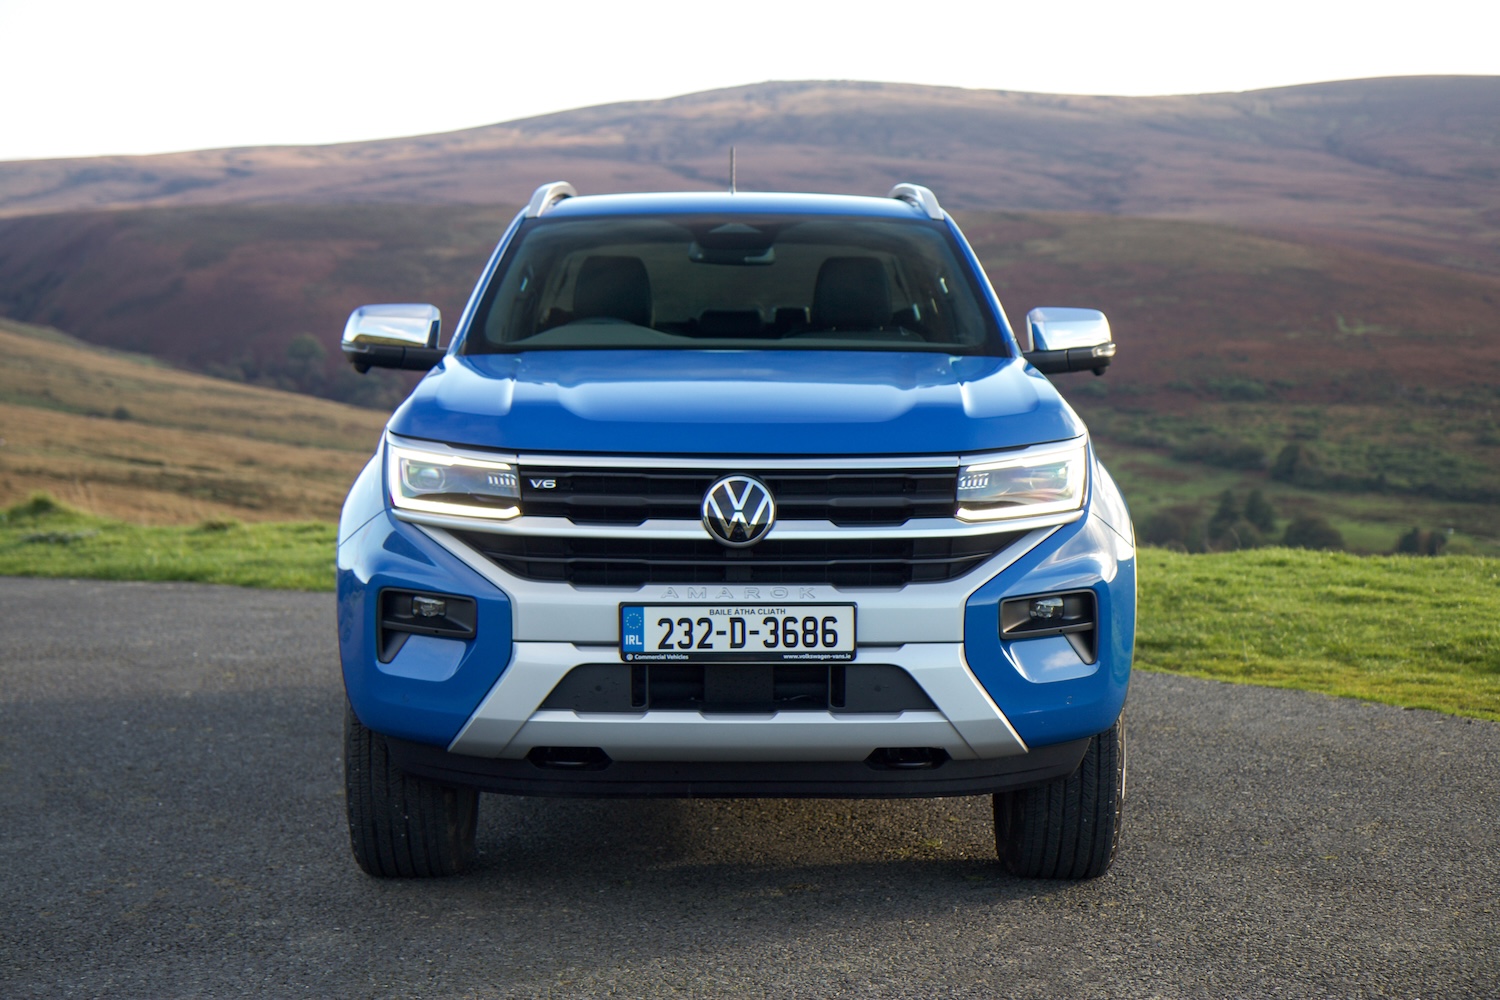 Opinion: The Volkswagen Amarok shares some bits with the Ford Ranger so  what? - Drive